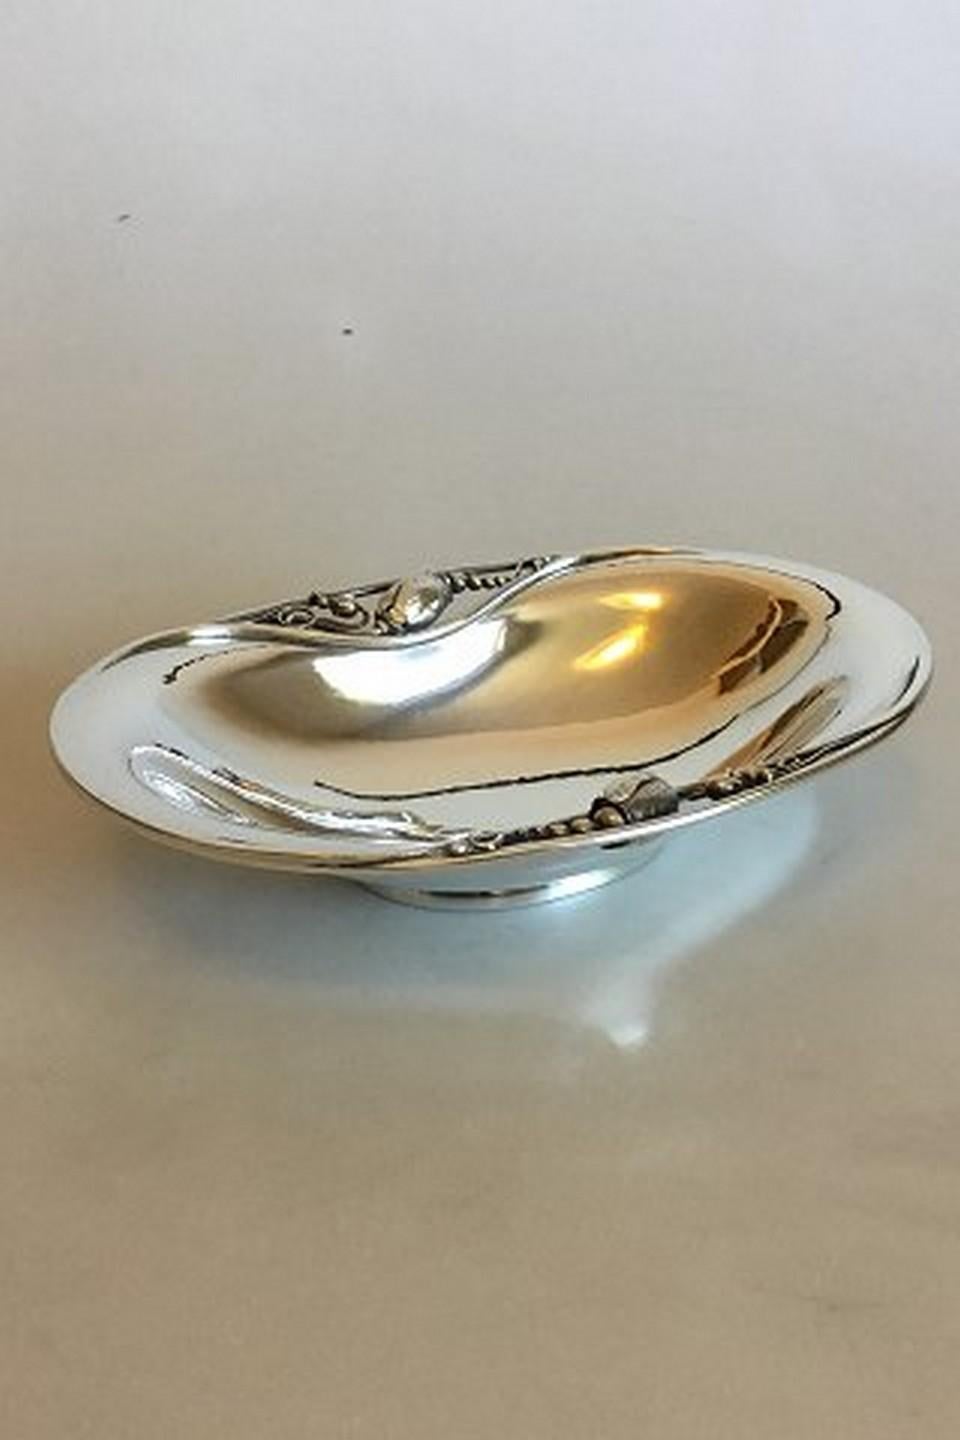 Georg Jensen sterling silver blossom bowl no. 2A.
Measures 19.6 cm / 7 23/32 in. x 14 cm 5 33/64 in. x 4 cm 1 37/64 in.
Weighs 264 g / 9.30 oz. Item from after 1945
Item no.: 336509.